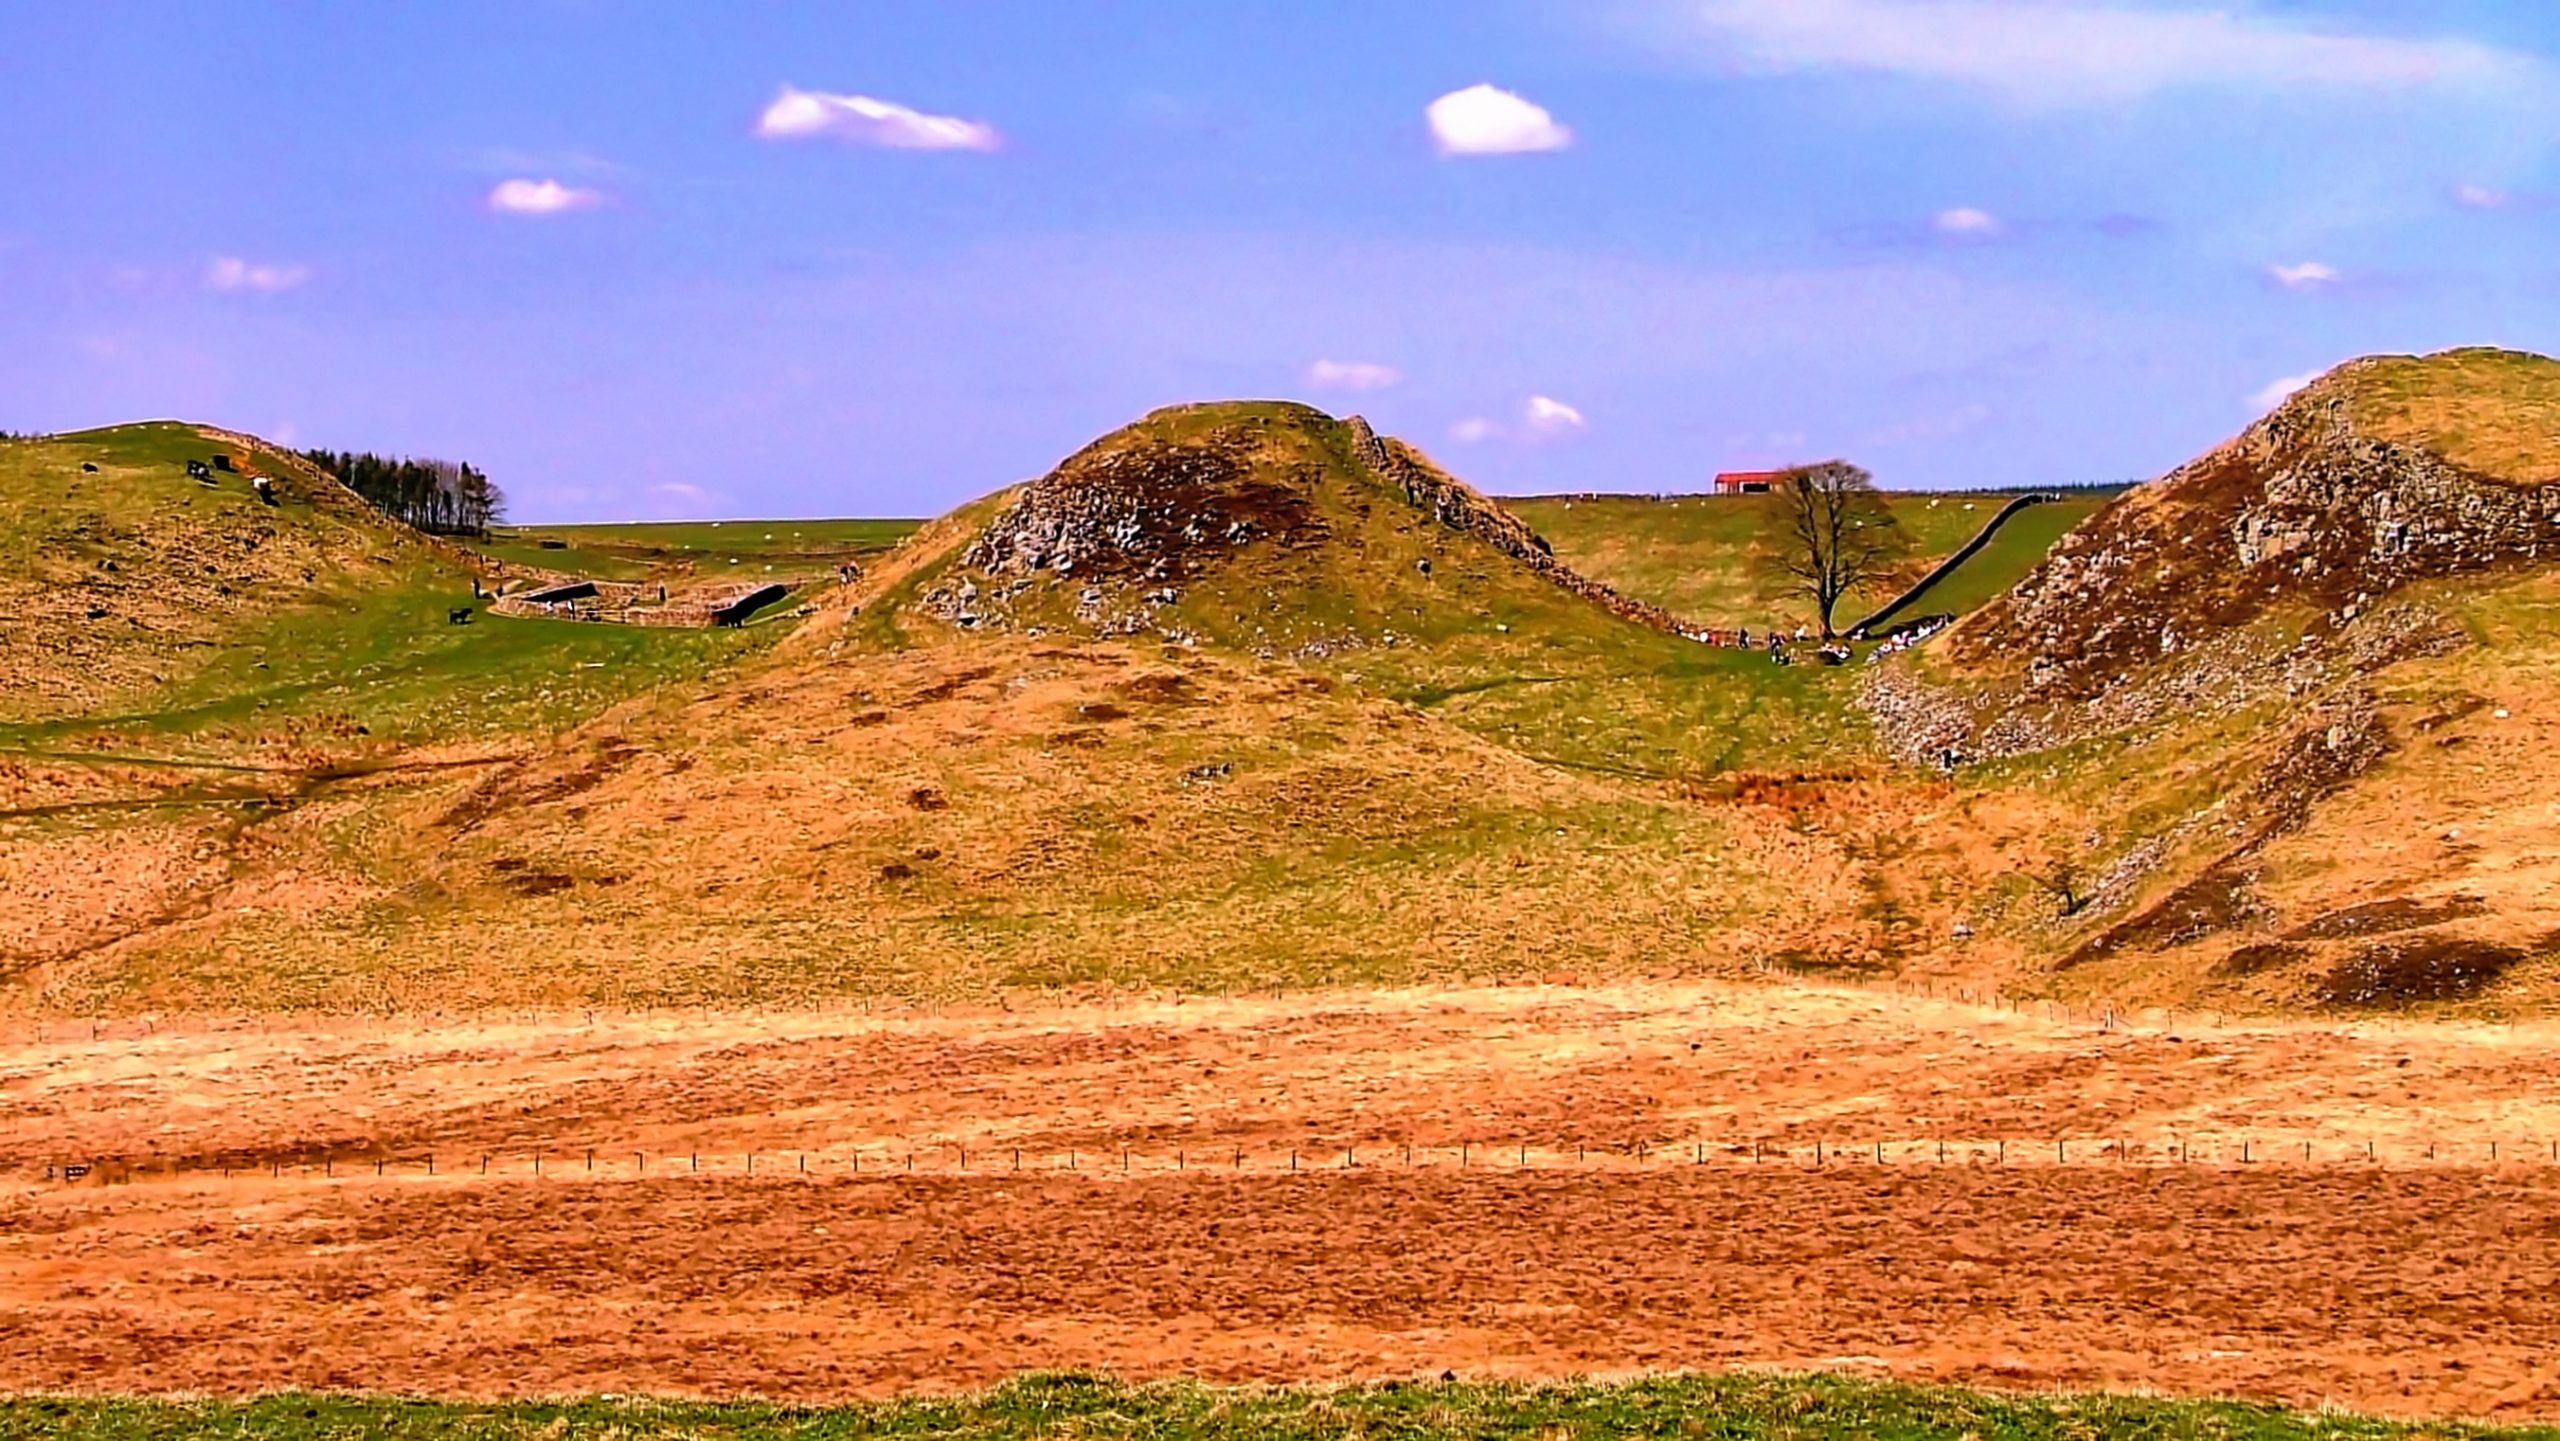 Milecastle 39 and the Sycamore Gap